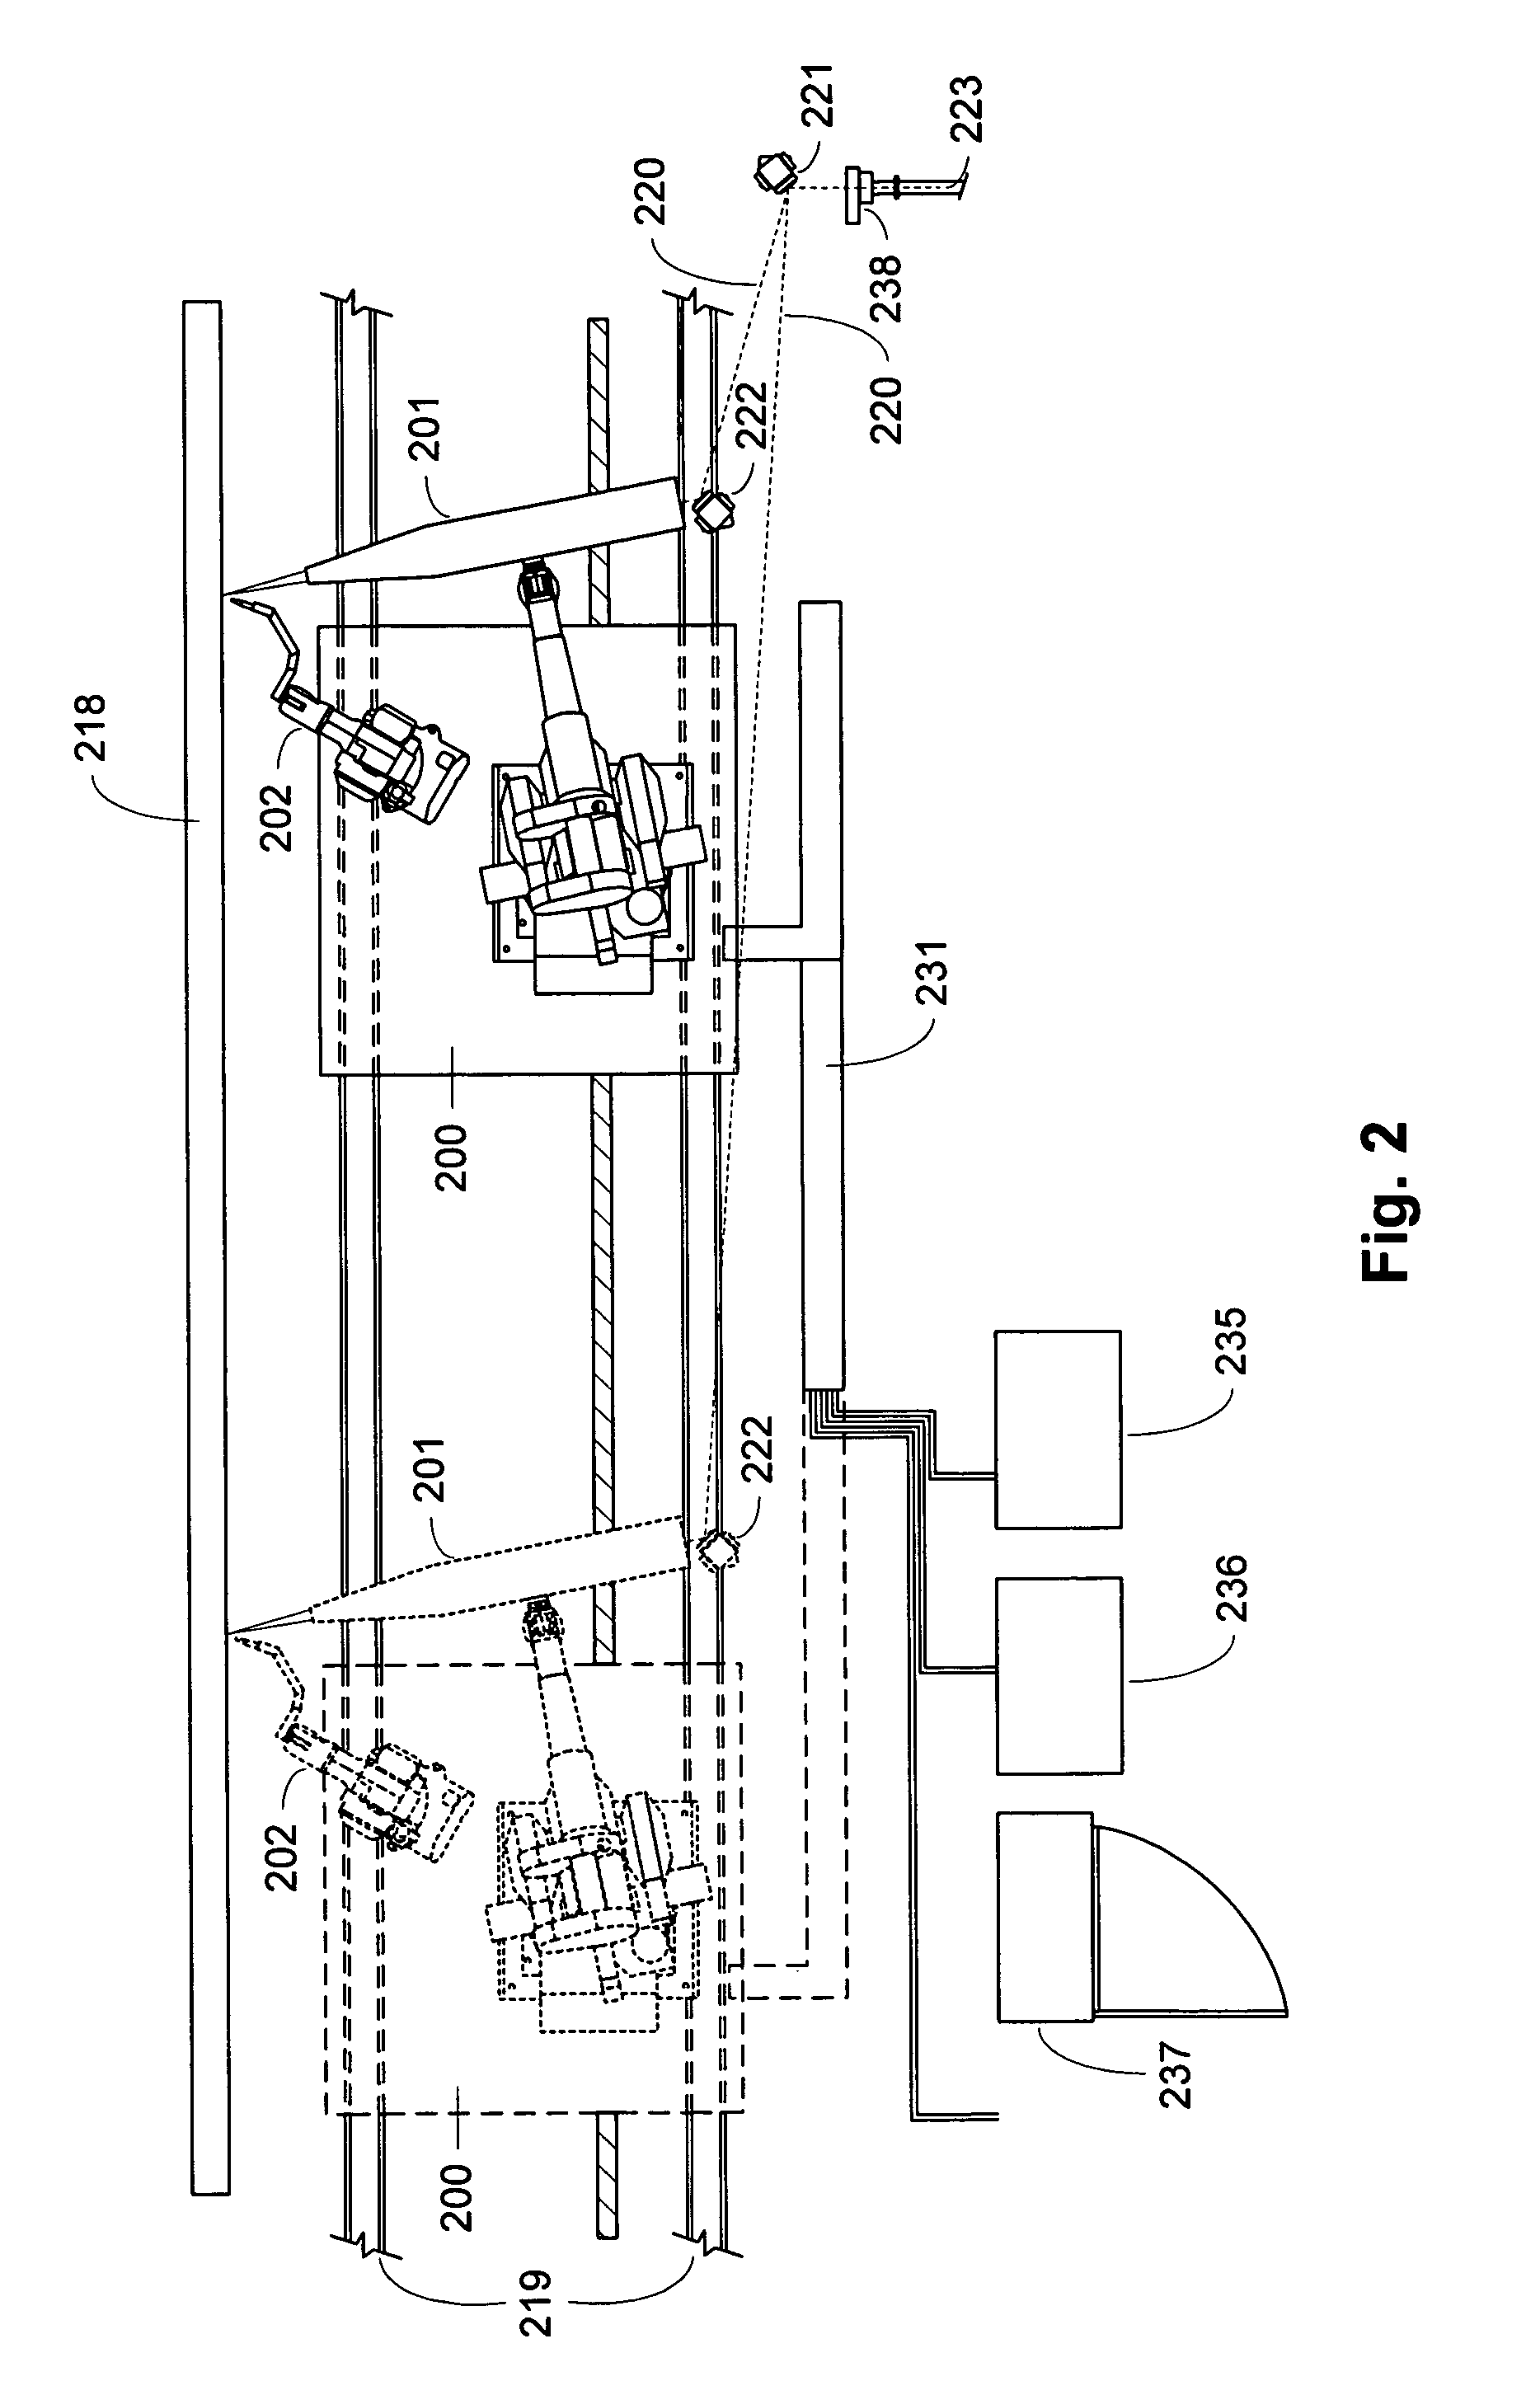 Active beam delivery system with image relay